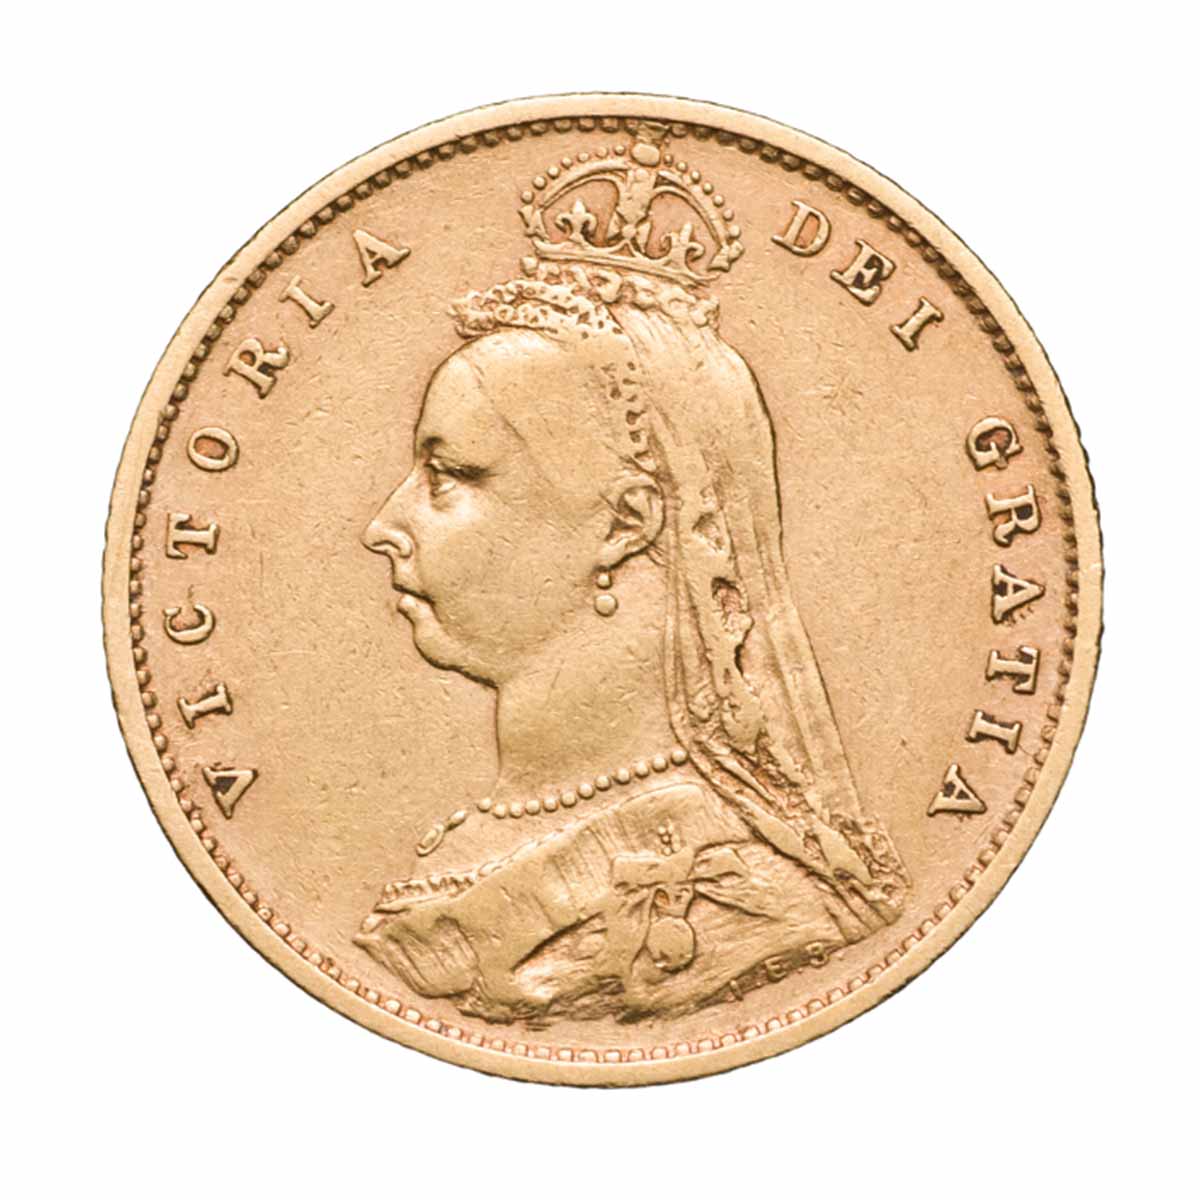 Queen Victoria 1893M Jubilee Gold Half Sovereign about Very Fine